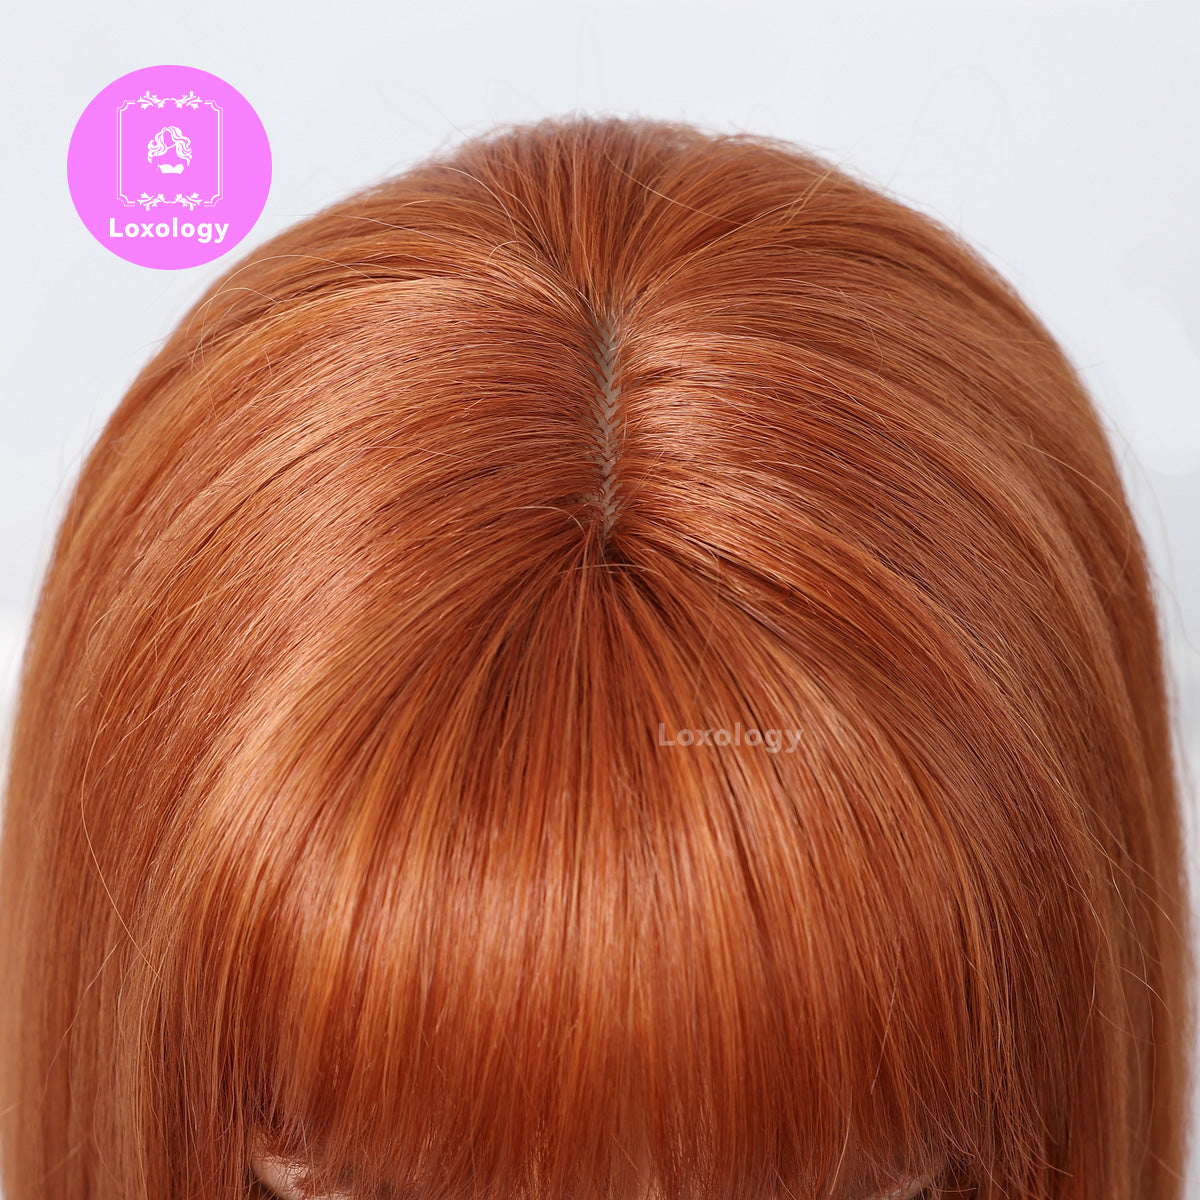 【Addison】Loxology | 12Inch short straight bobo wigs orange with bangs wigs for women